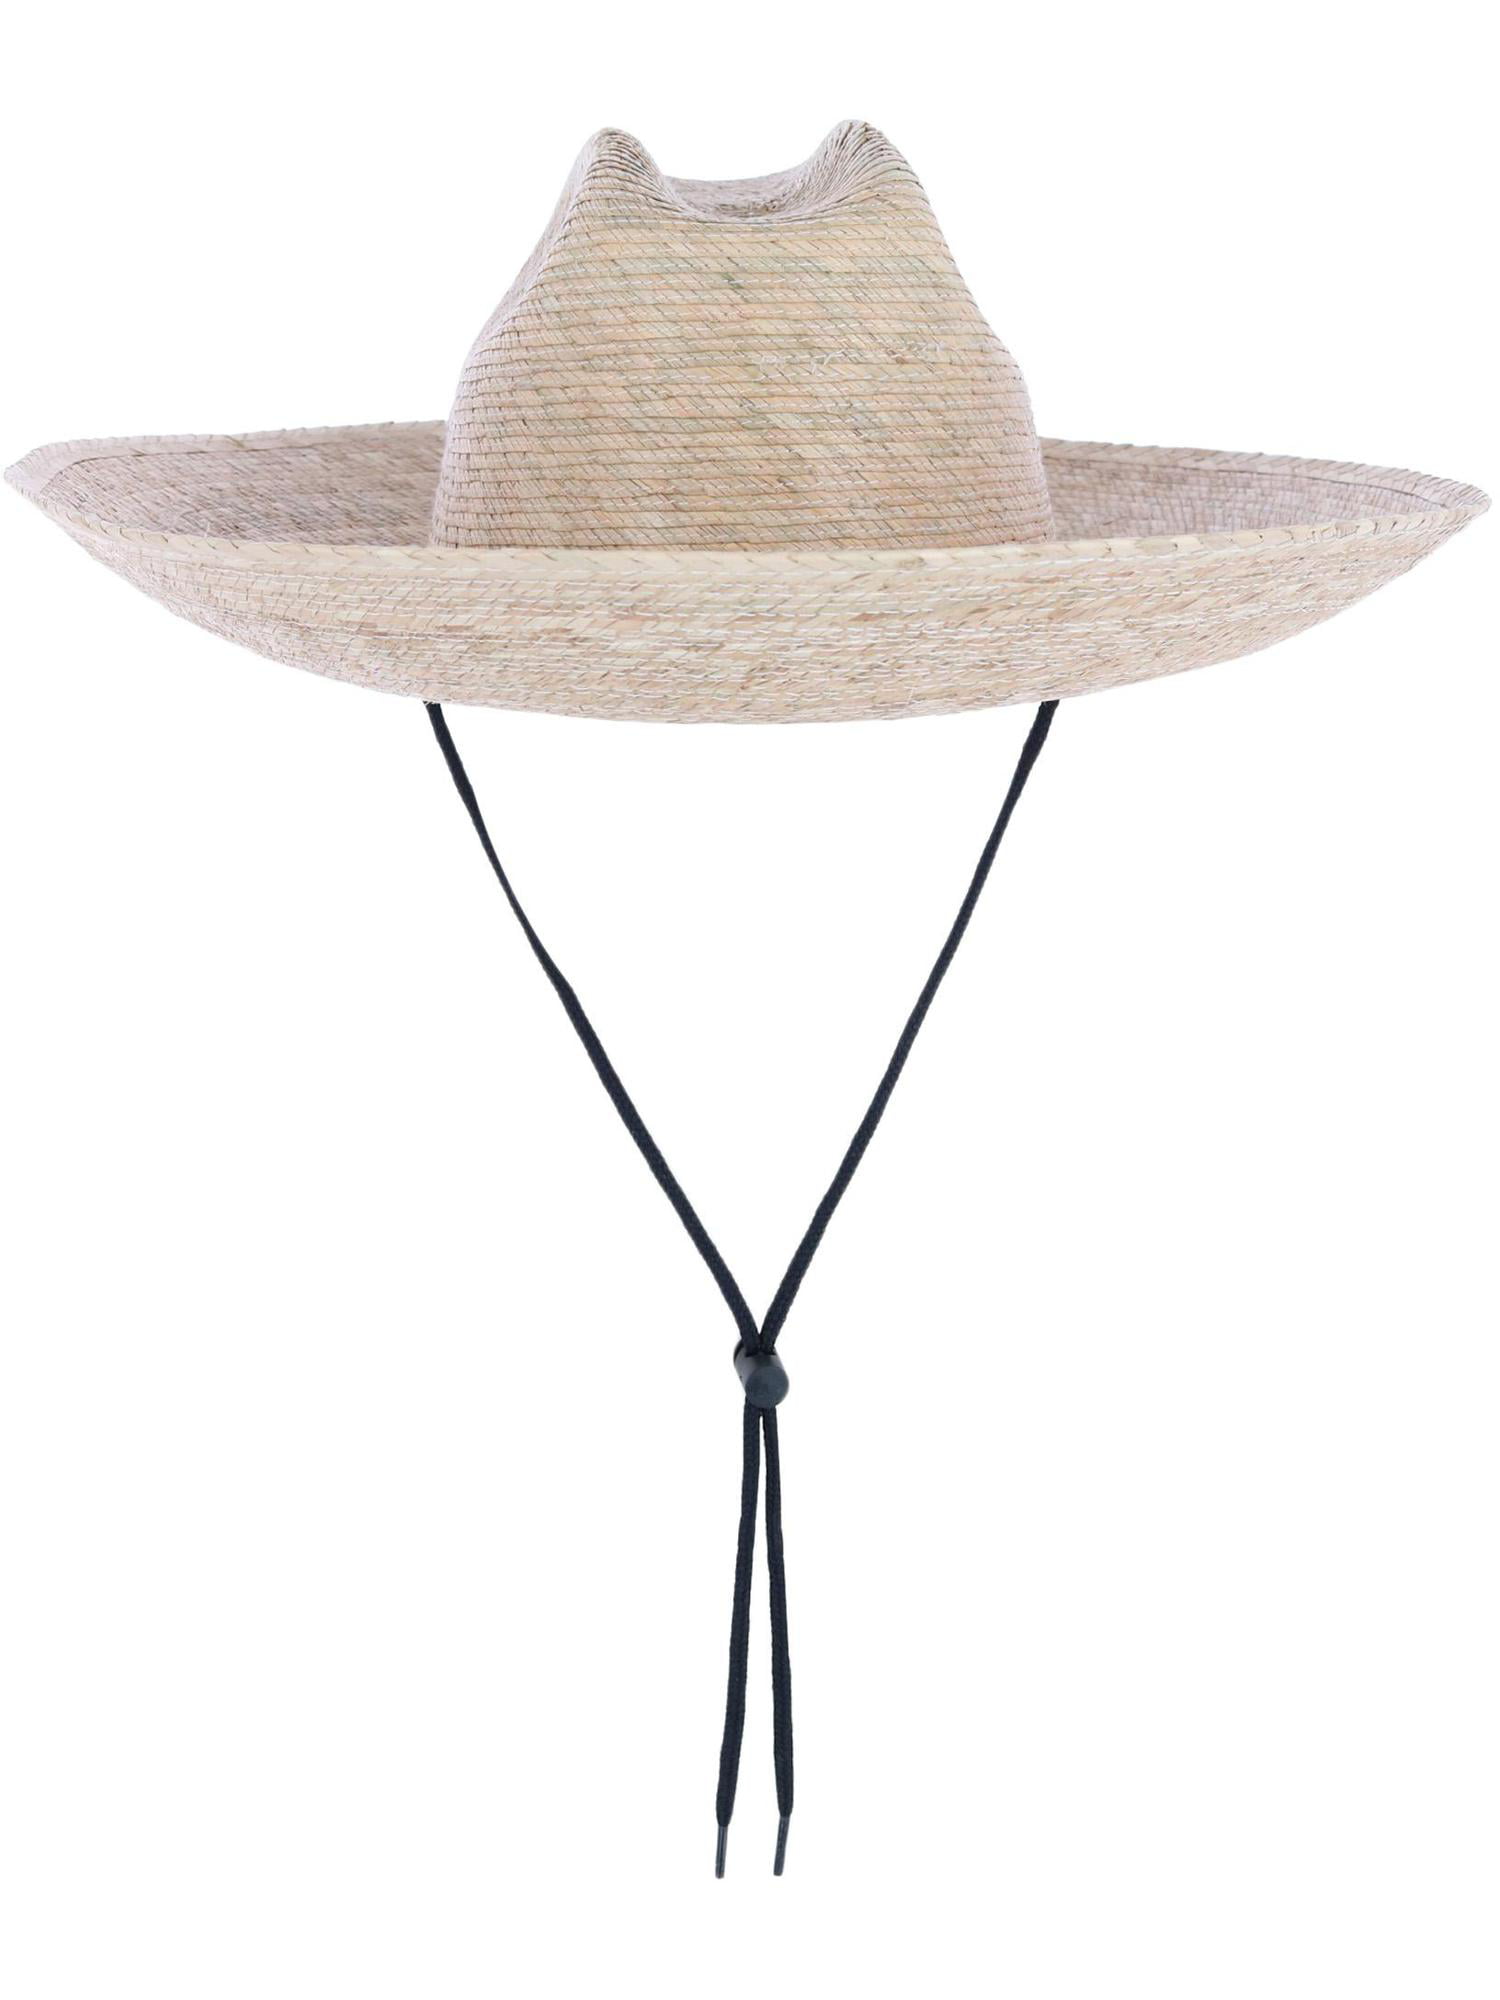 CTM Wide Brim Crushable Straw Lifeguard Hat with Chin Strap 